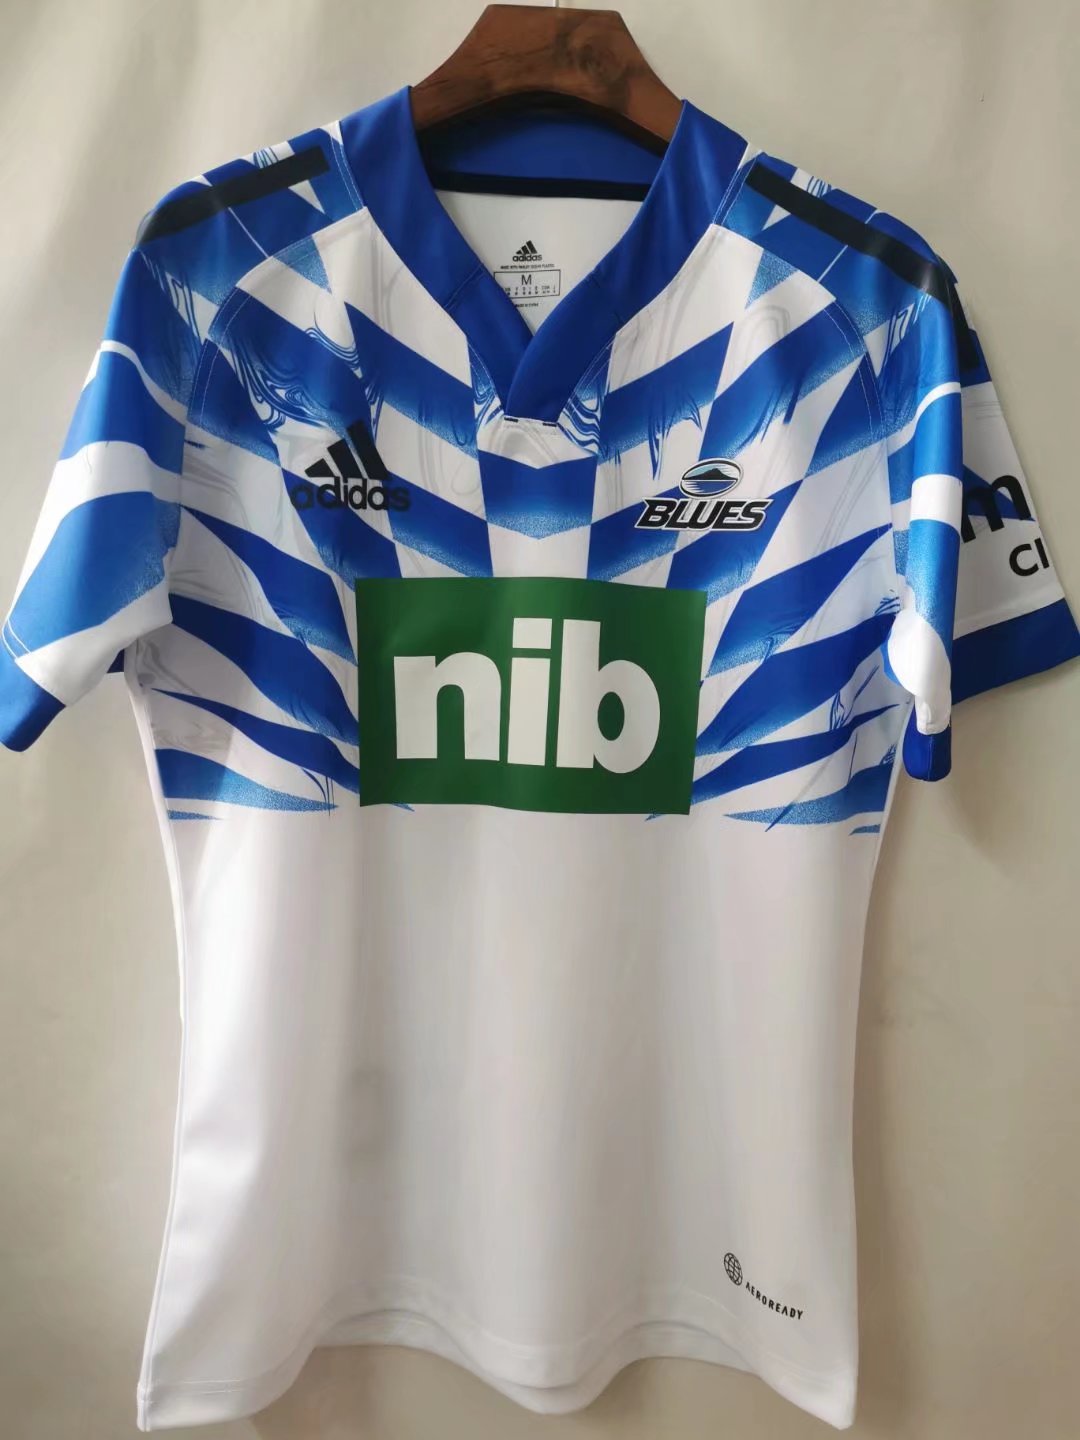 2021/22 Blues Blue & White Thailand Rugby Shirts-805